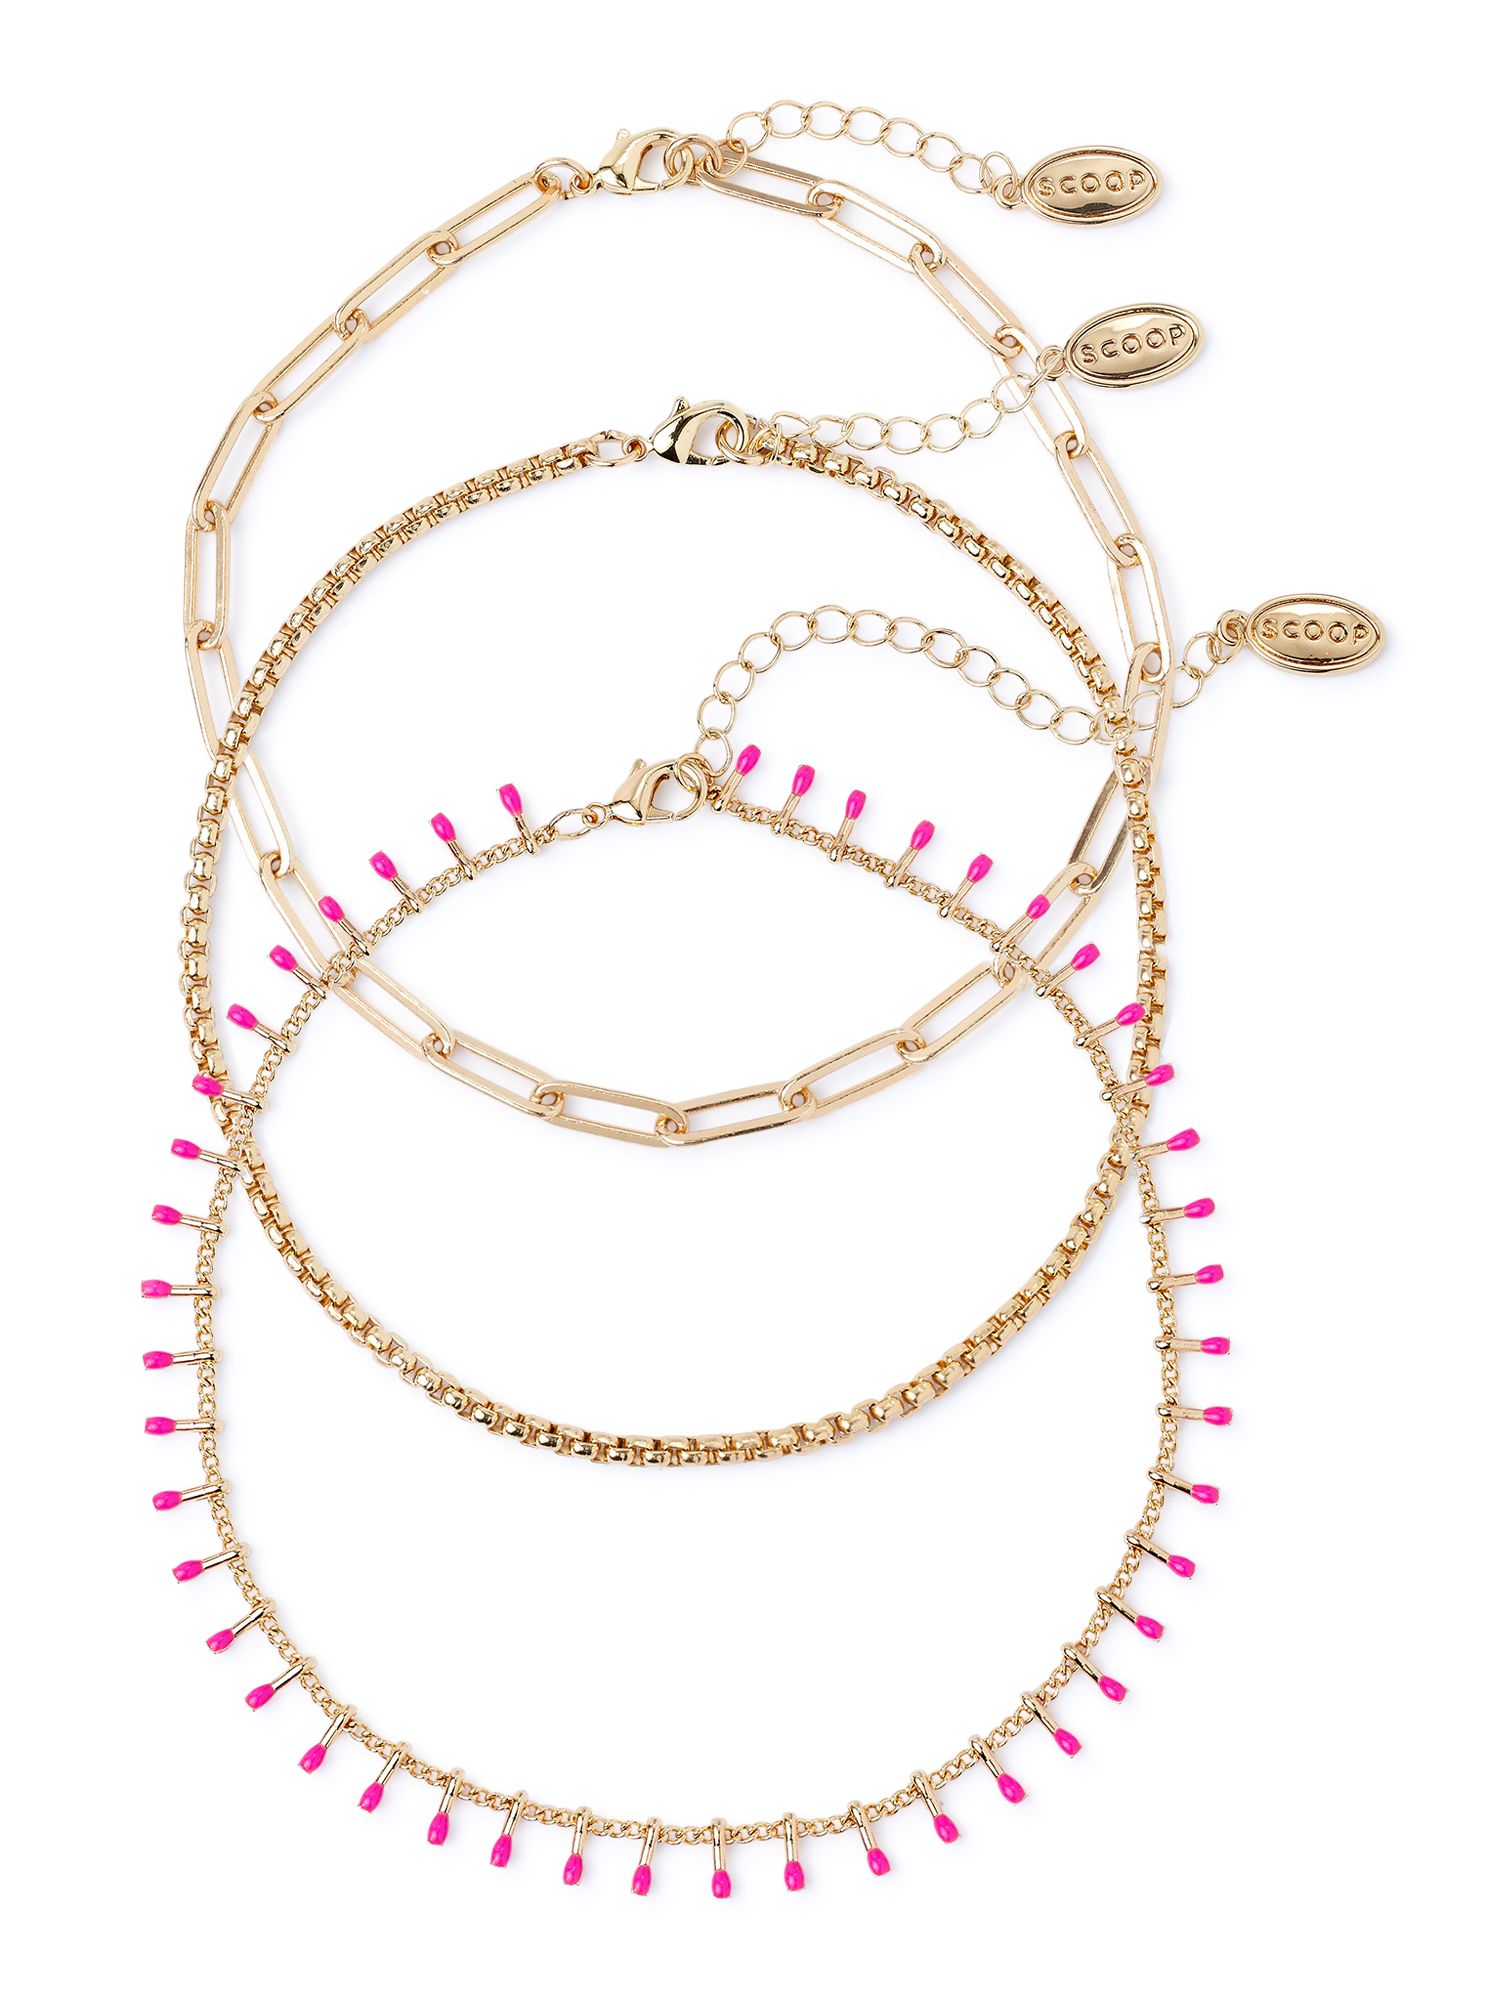 Scoop Women’s 14K Gold Flash-Plated Bead, Clip and Chain Anklets, 3-Piece Set, Pink - Walmart.c... | Walmart (US)